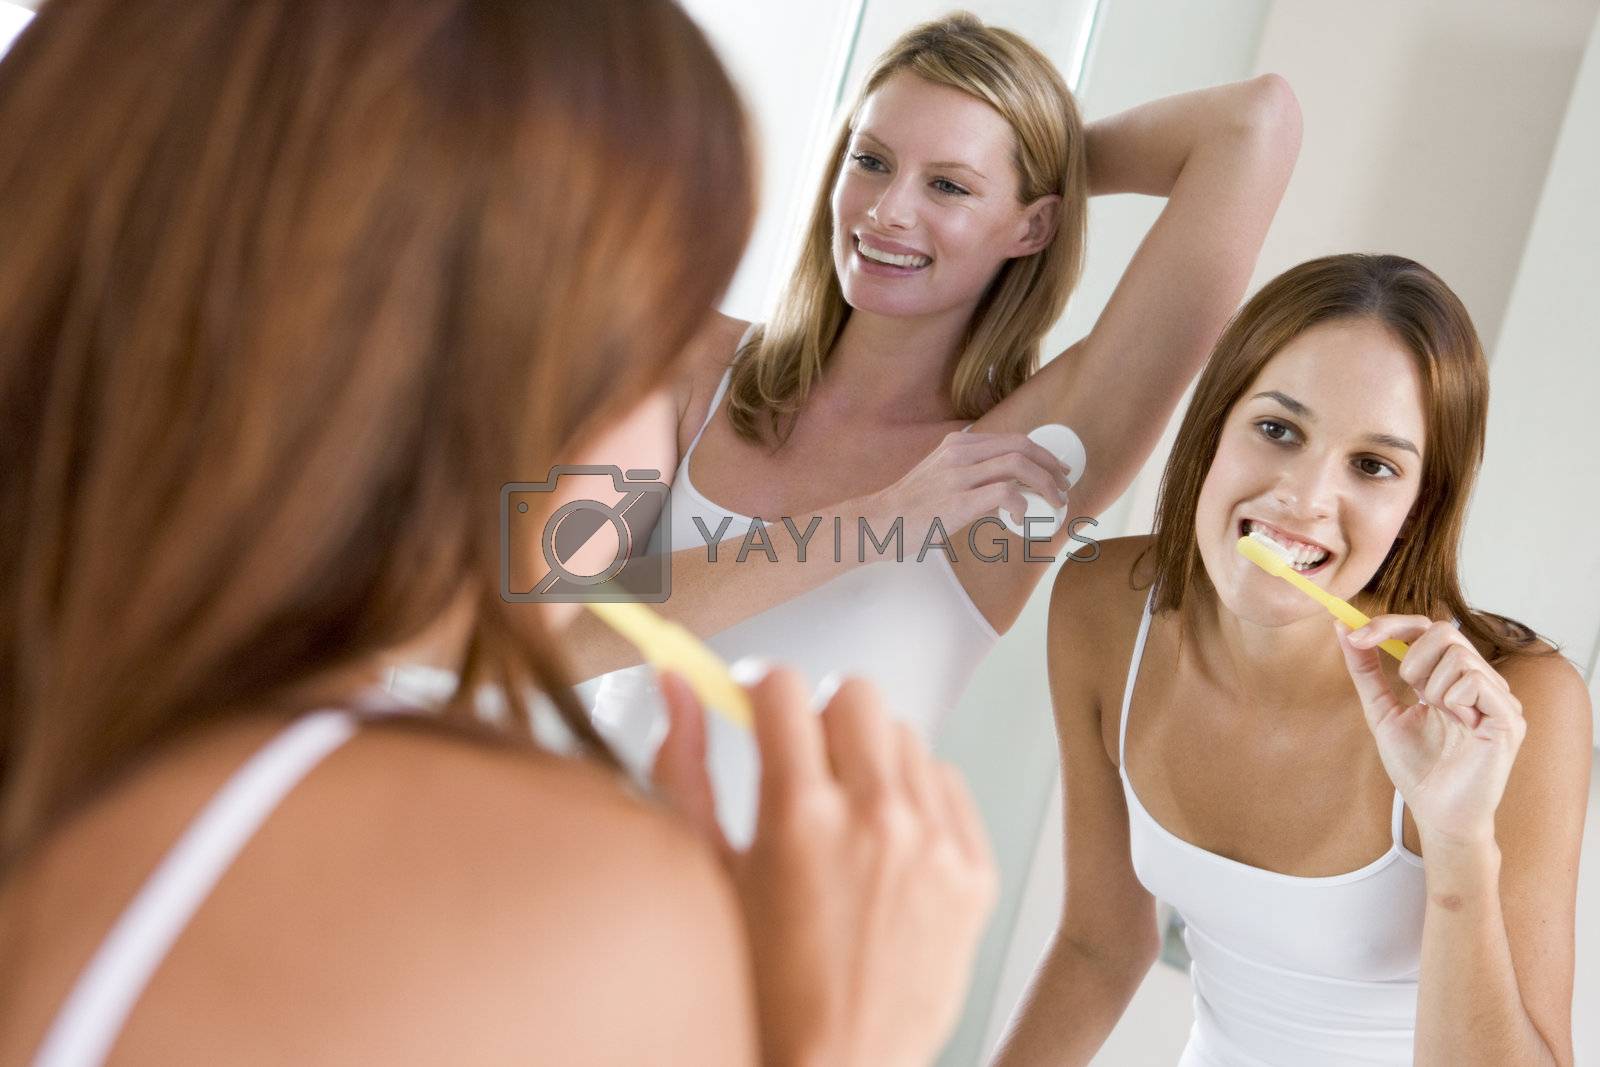 Royalty free image of Two women in bathroom brushing teeth applying deodorant and smil by MonkeyBusiness